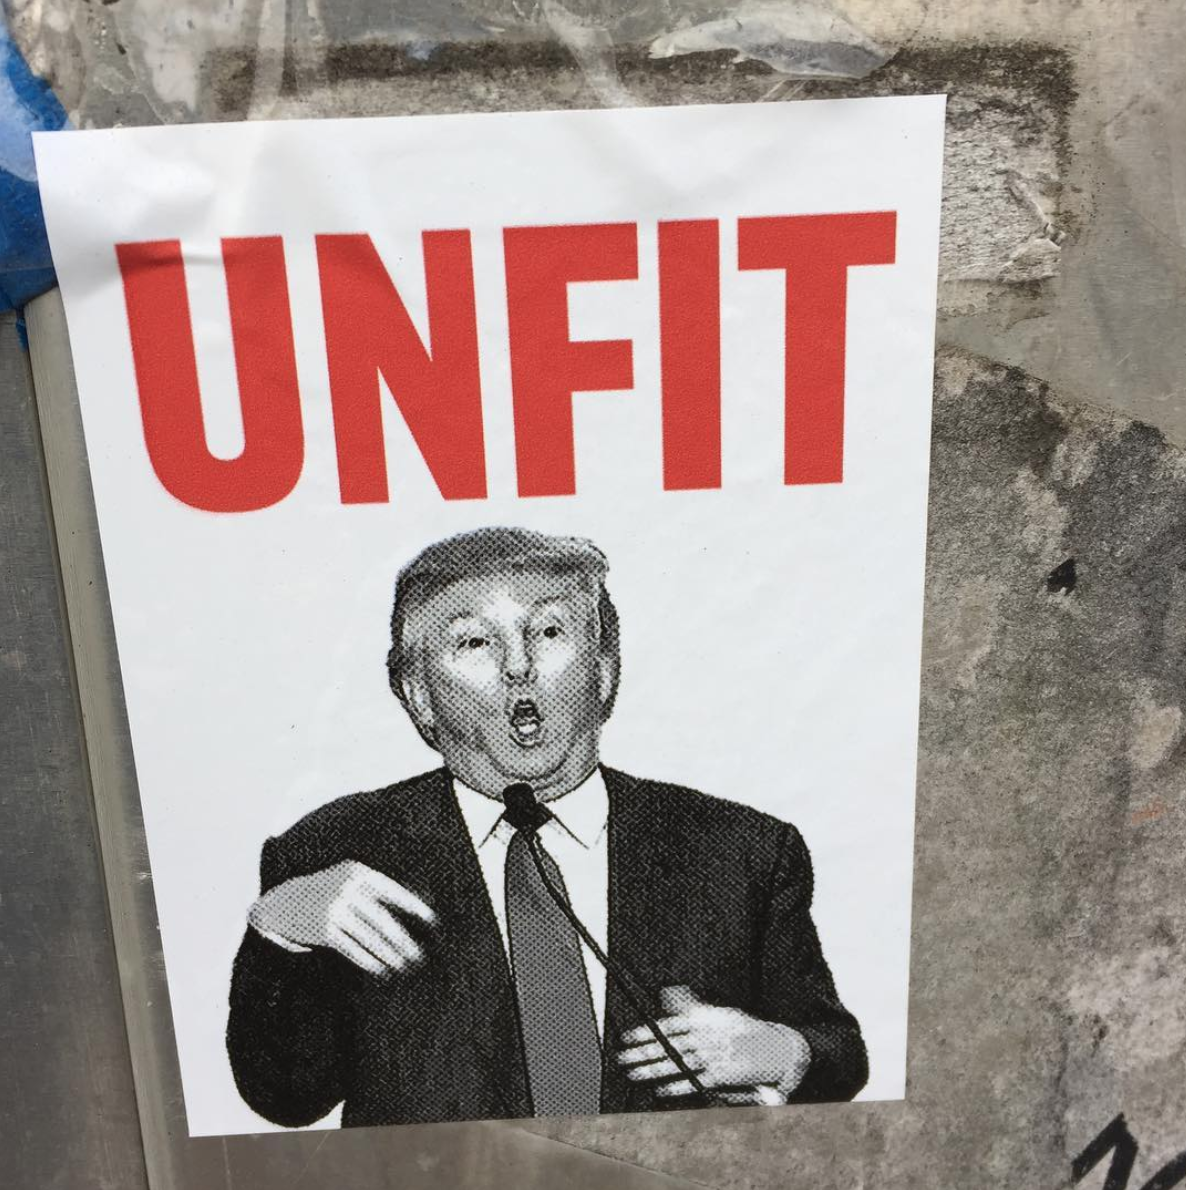 Picture of Trump saying "Unfit"